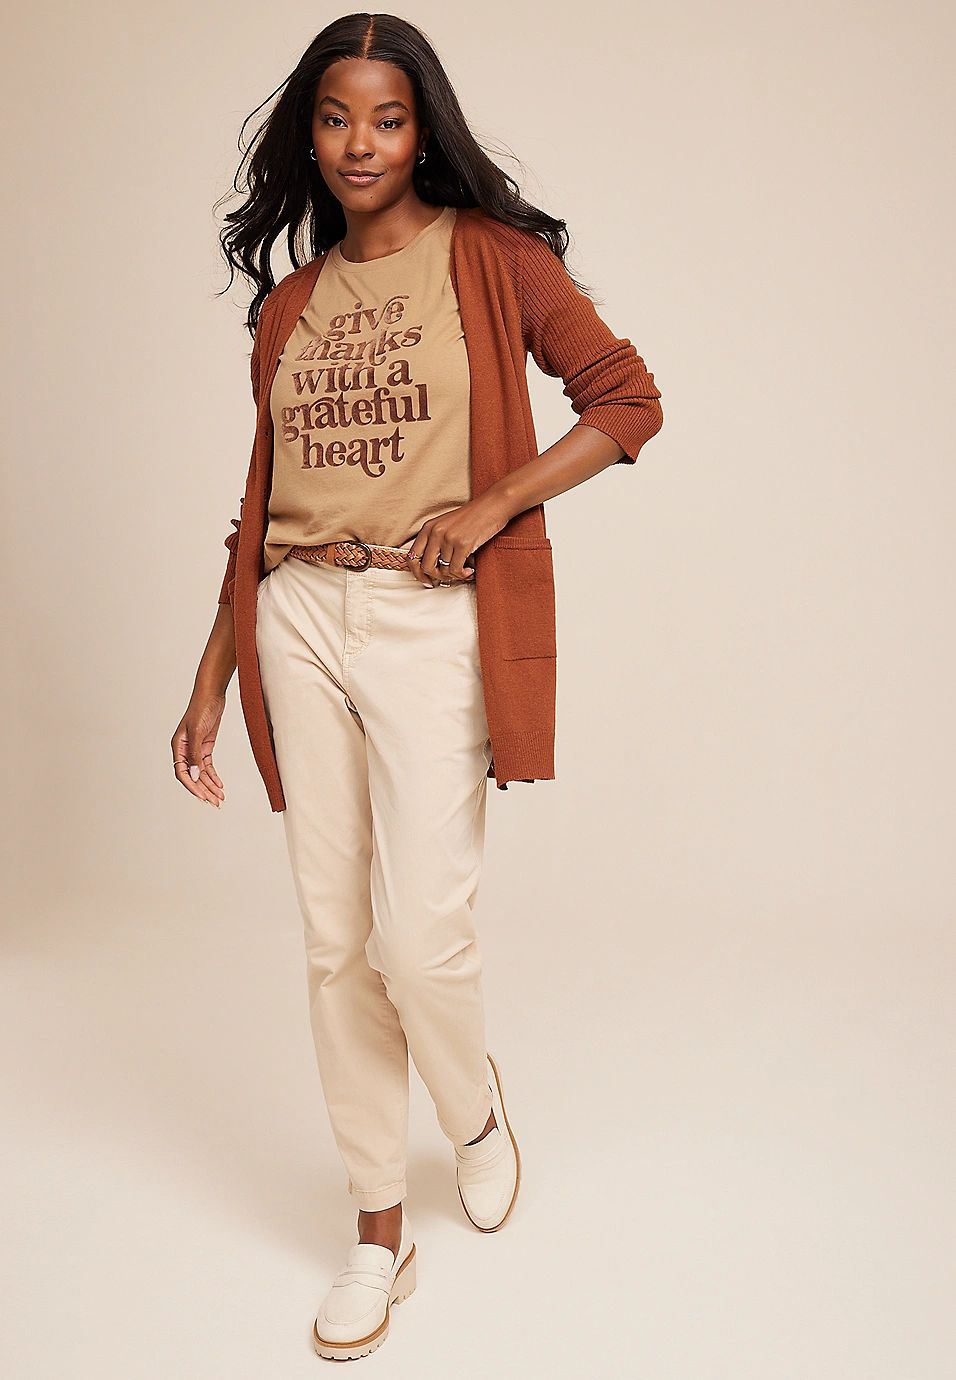 Give Thanks With A Grateful Heart Graphic Tee | Maurices